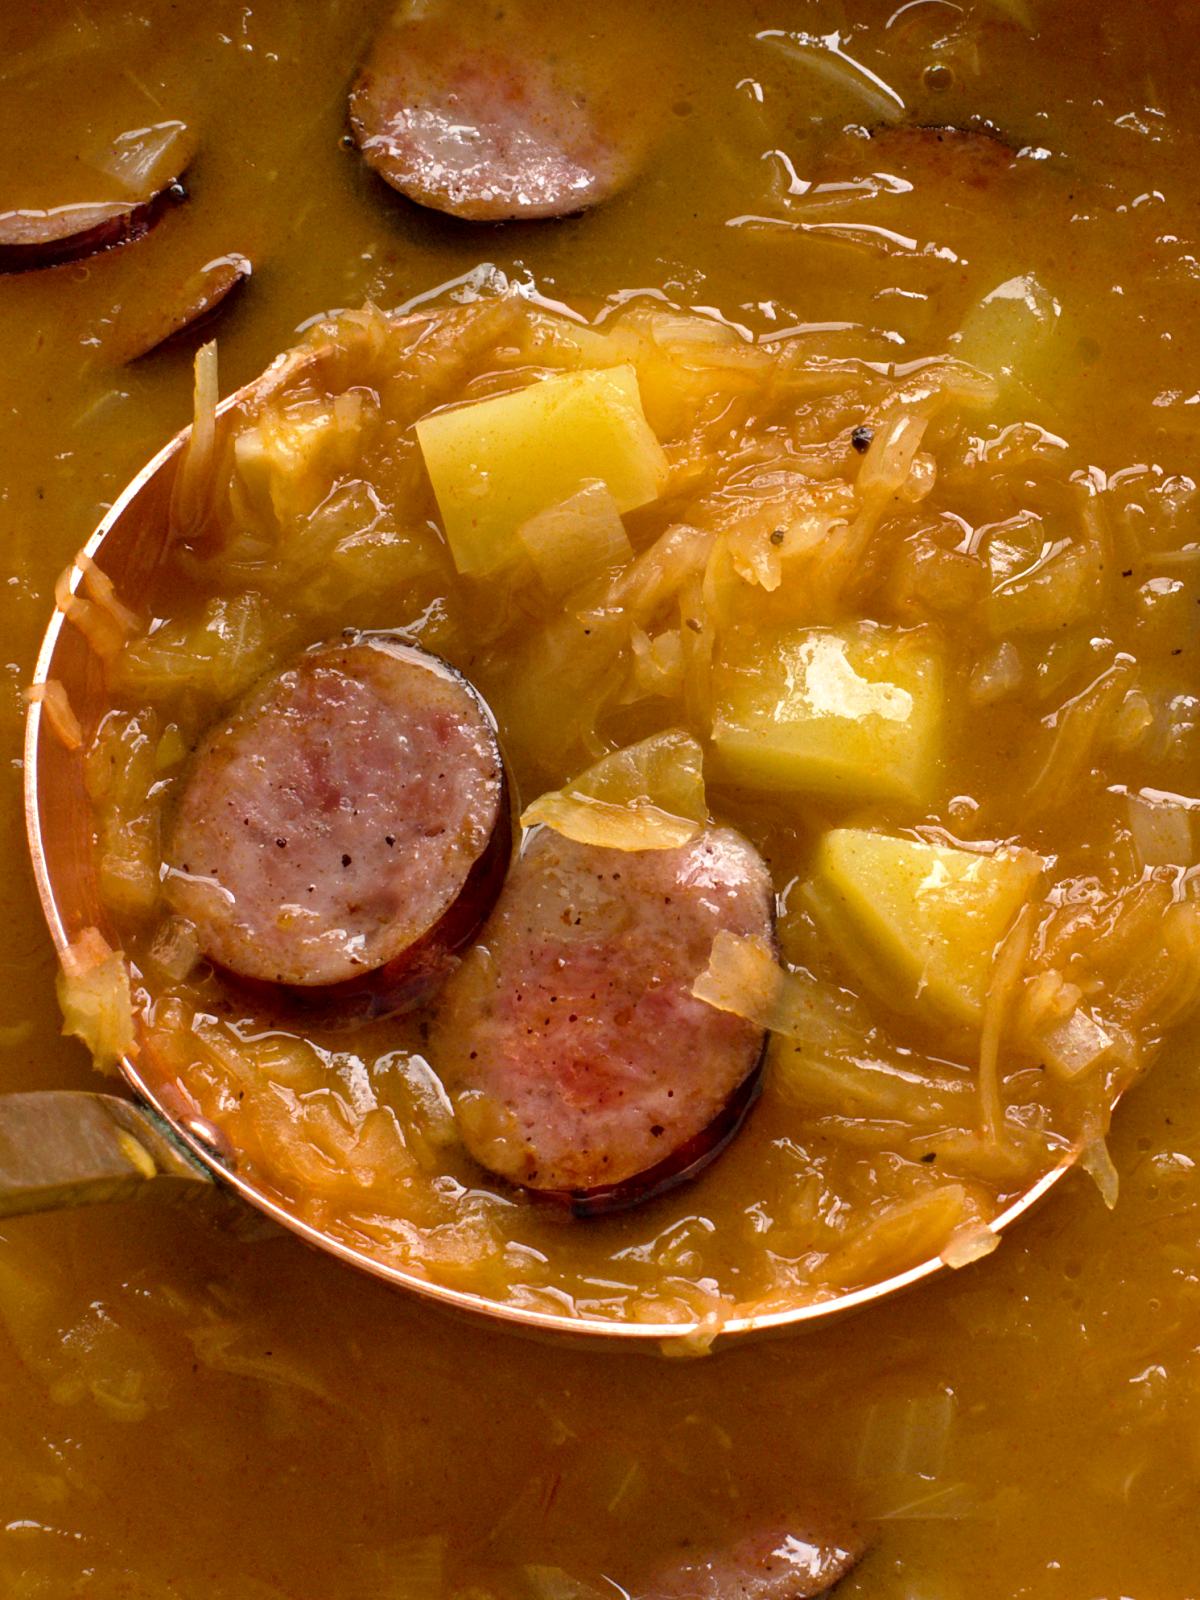 Cooked sauerkraut soup with fried sausage.